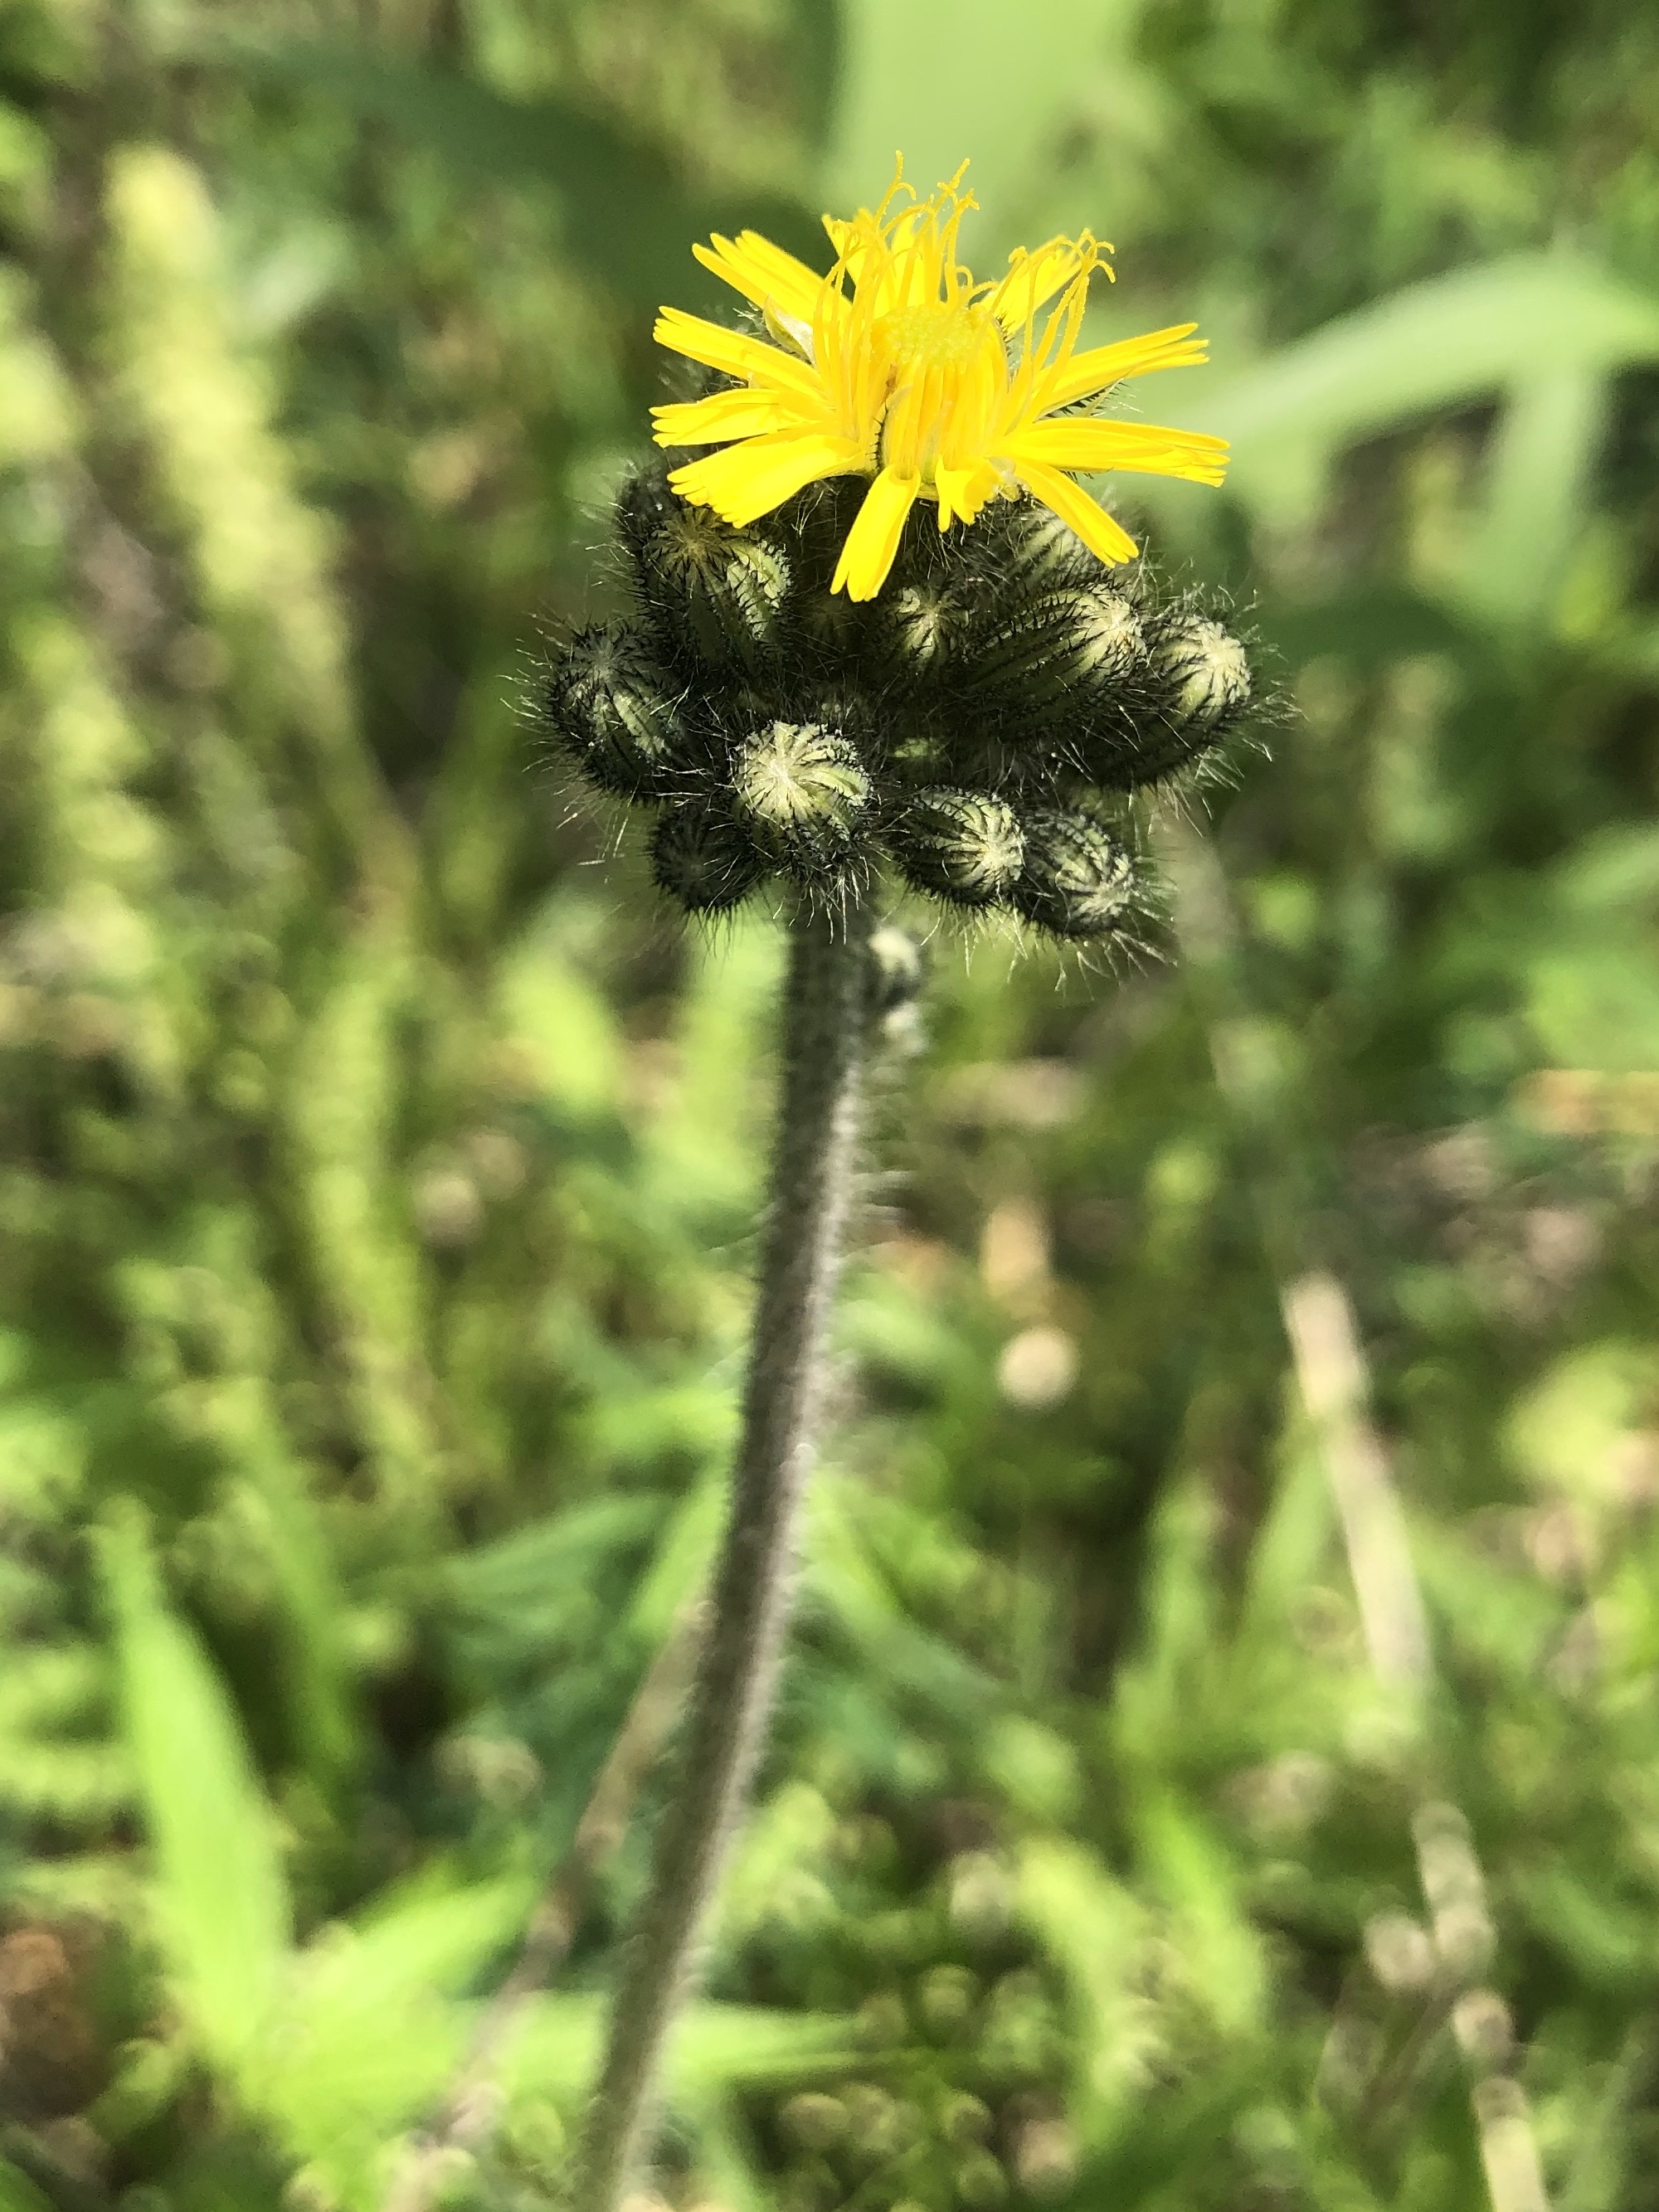 Meadow Hawkweed leaves and stem in the Curtis Prairie in the University of Wisconsin-Madison Arboretum in Madison, Wisconsin on June 7, 2022.